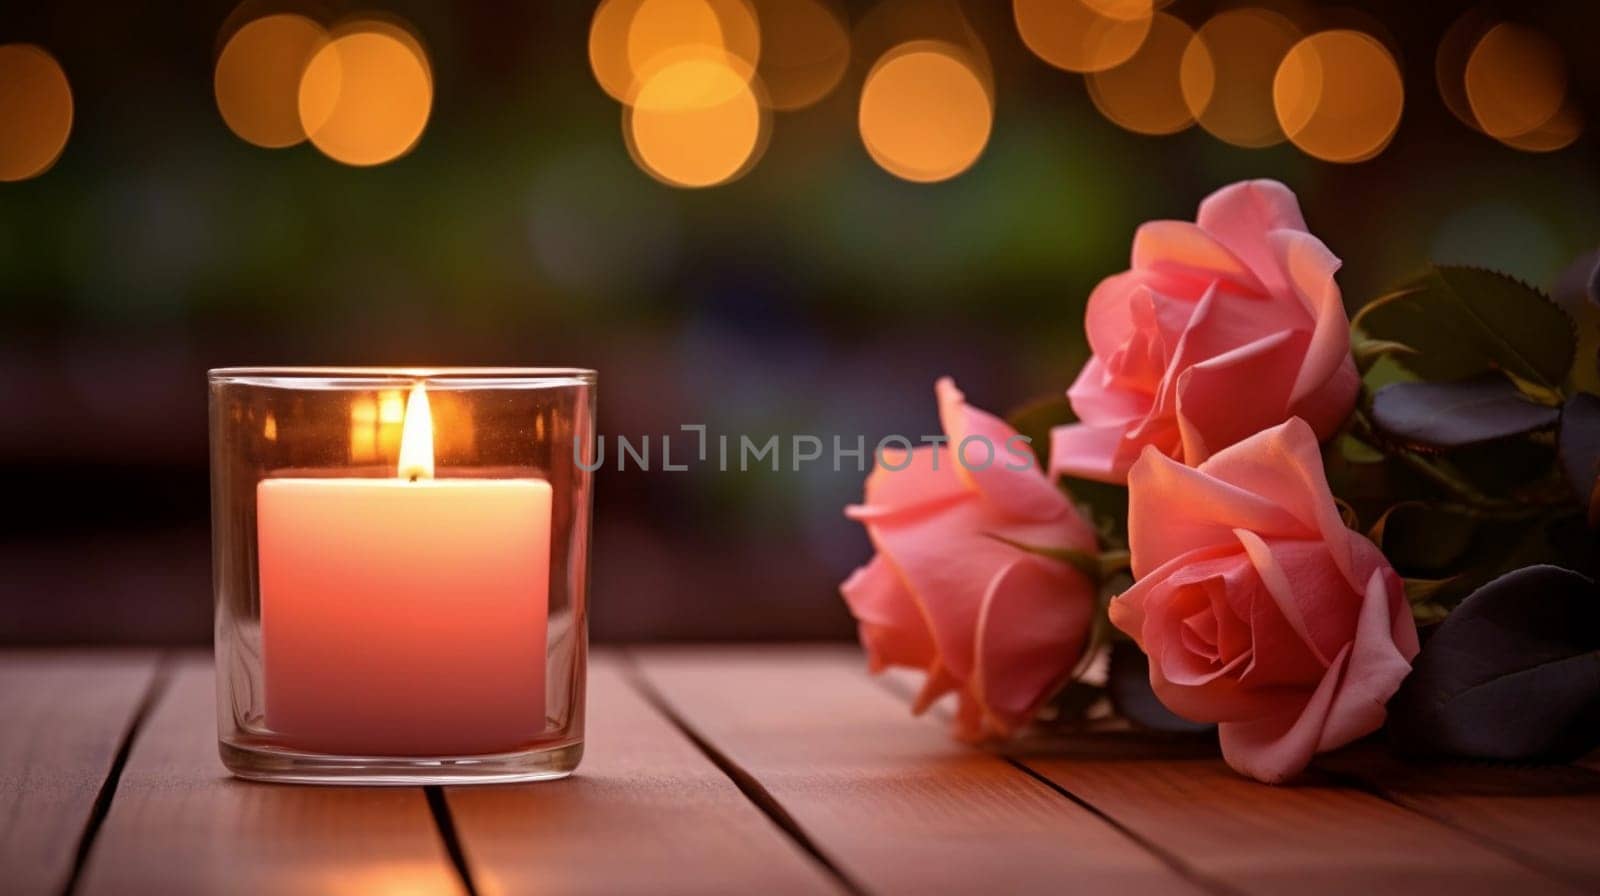 A burning candle and rose flowers against the background of a garden. Aromatherapy concept. by kizuneko